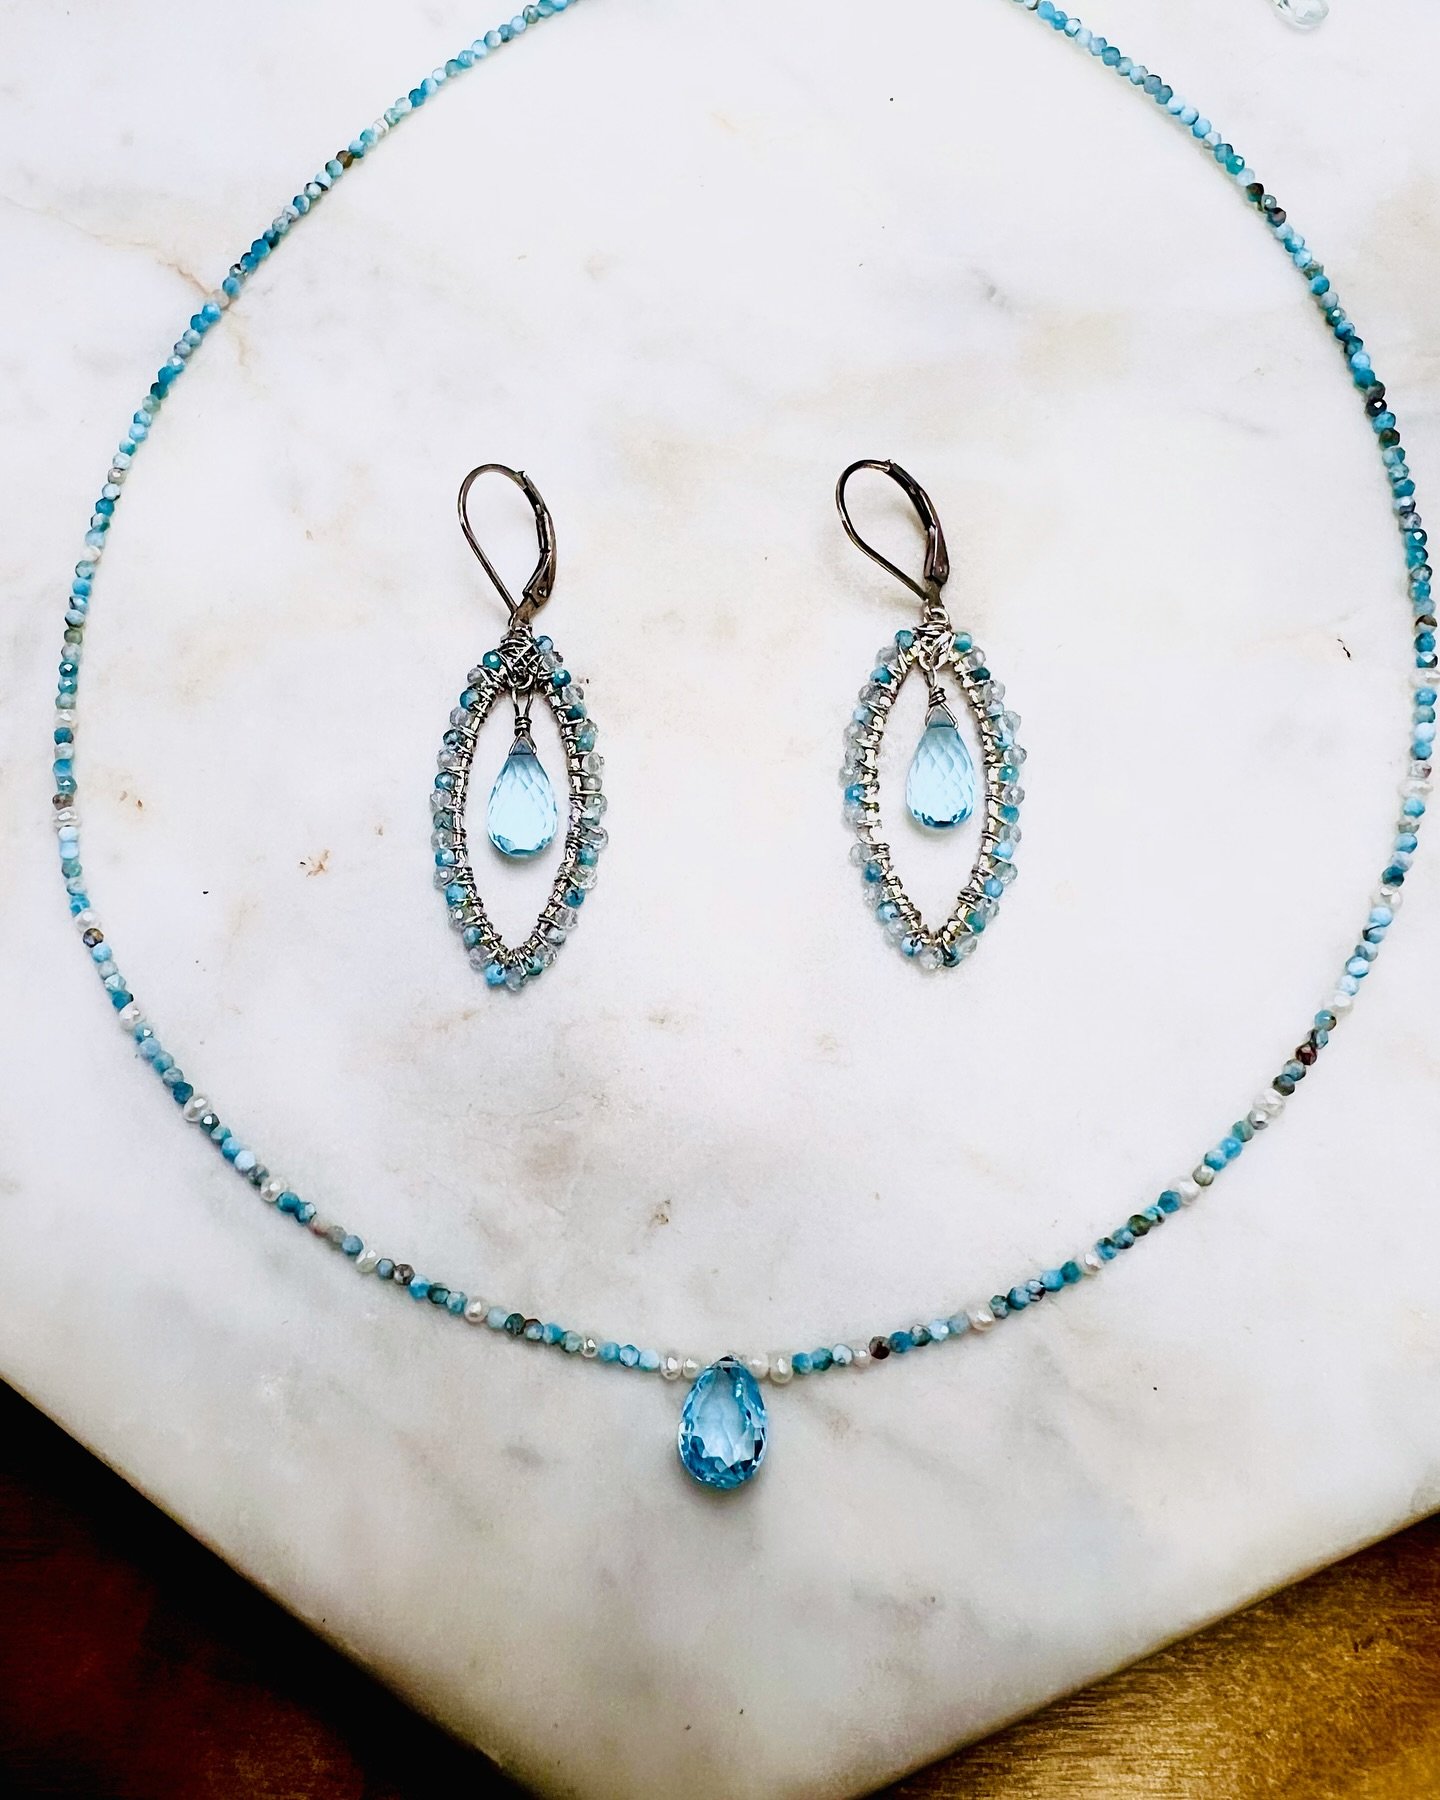 My Mom loved her Mother&rsquo;s Day gift! 💕 I added blue topaz to the earrings and created a necklace inspired by her favorite vintage Linka earrings. DM for your custom designs.
~
THURSDAY 5/16, 12-5
Westwood Village  FM
@farmhabitwv
~
SATURDAY, 5/